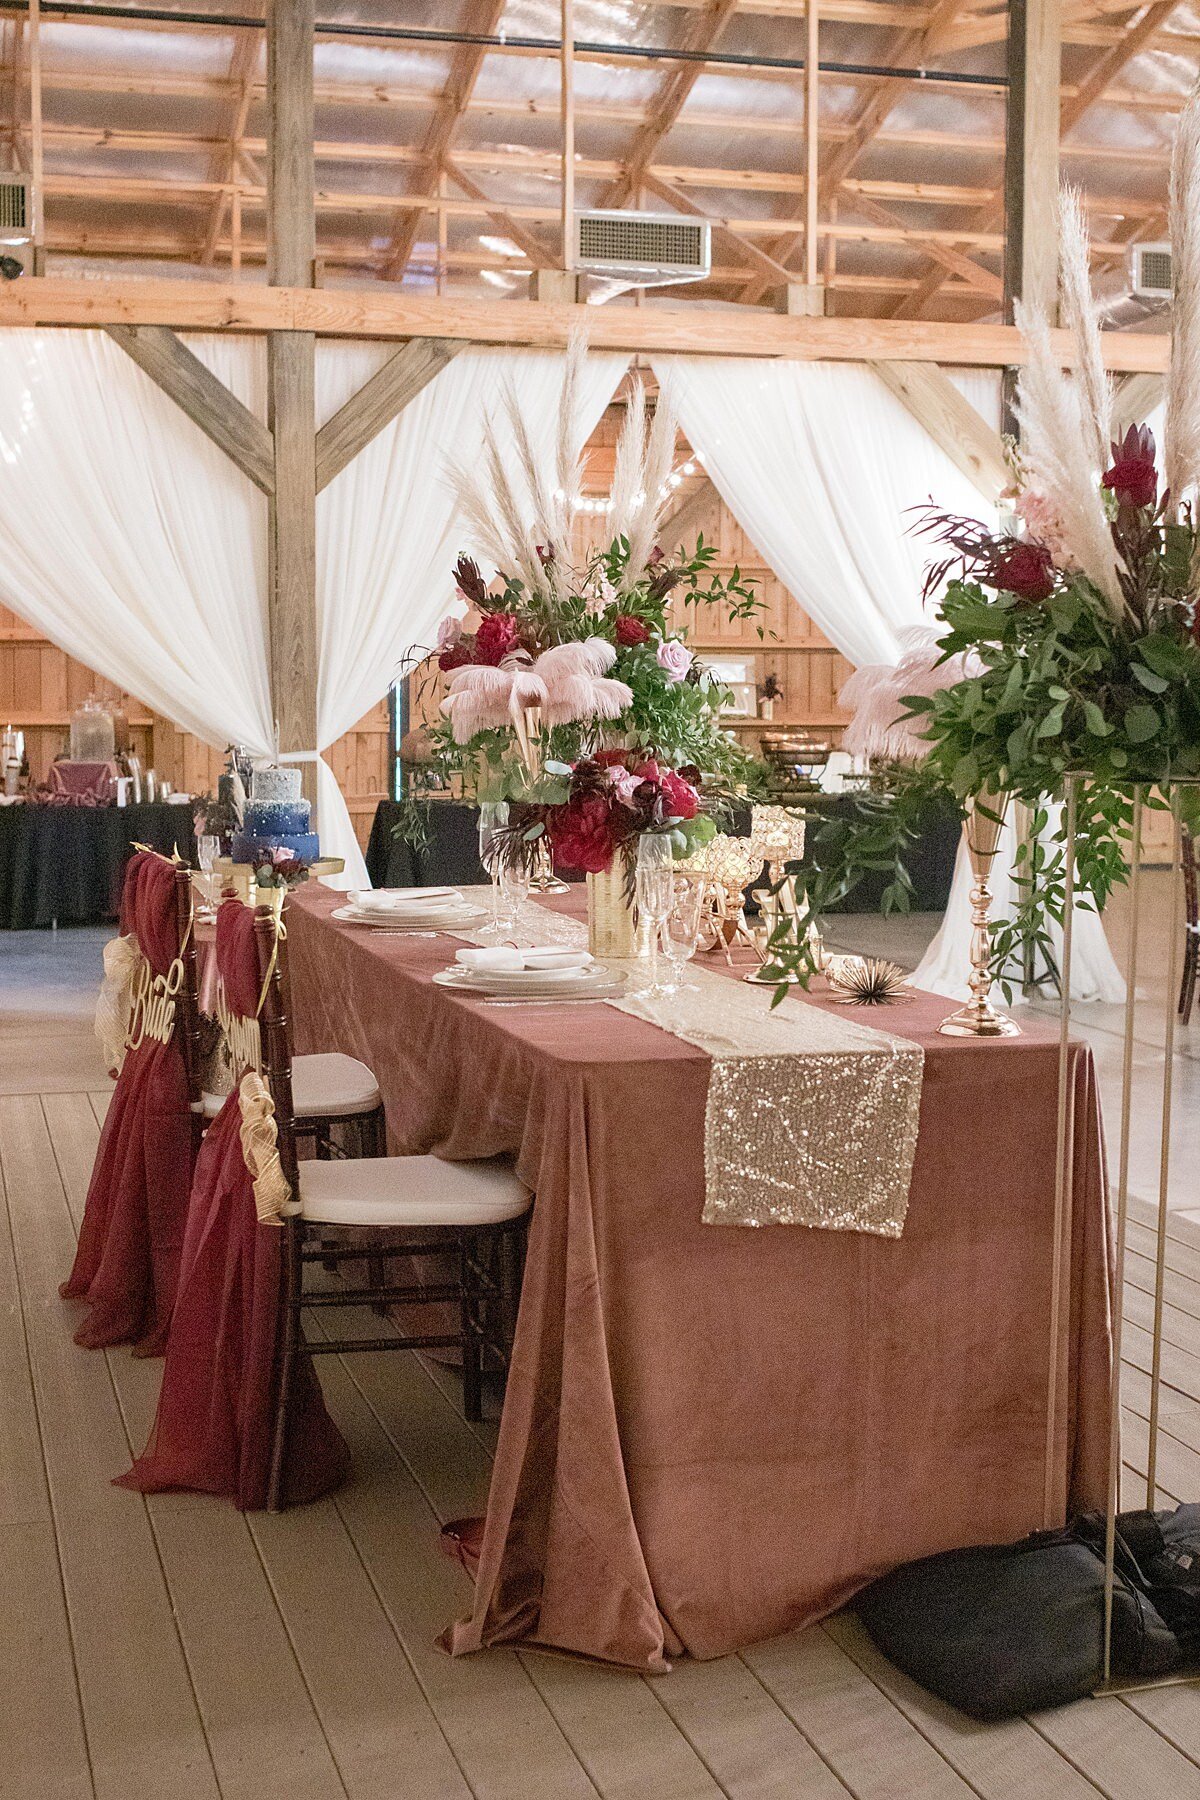 The sweetheart table, set on the stage at Saddle Woods Farm is set with a blush velvet table cloth and a gold sequined table runner. The brown chiavari chairs are set with white cushions and are decorated with burgundy organza fabric and gold BRIDE and GROOM signs hanging on the back. The table has two large blush and burgundy floral arrangements on gold stands accented by pampas grass.